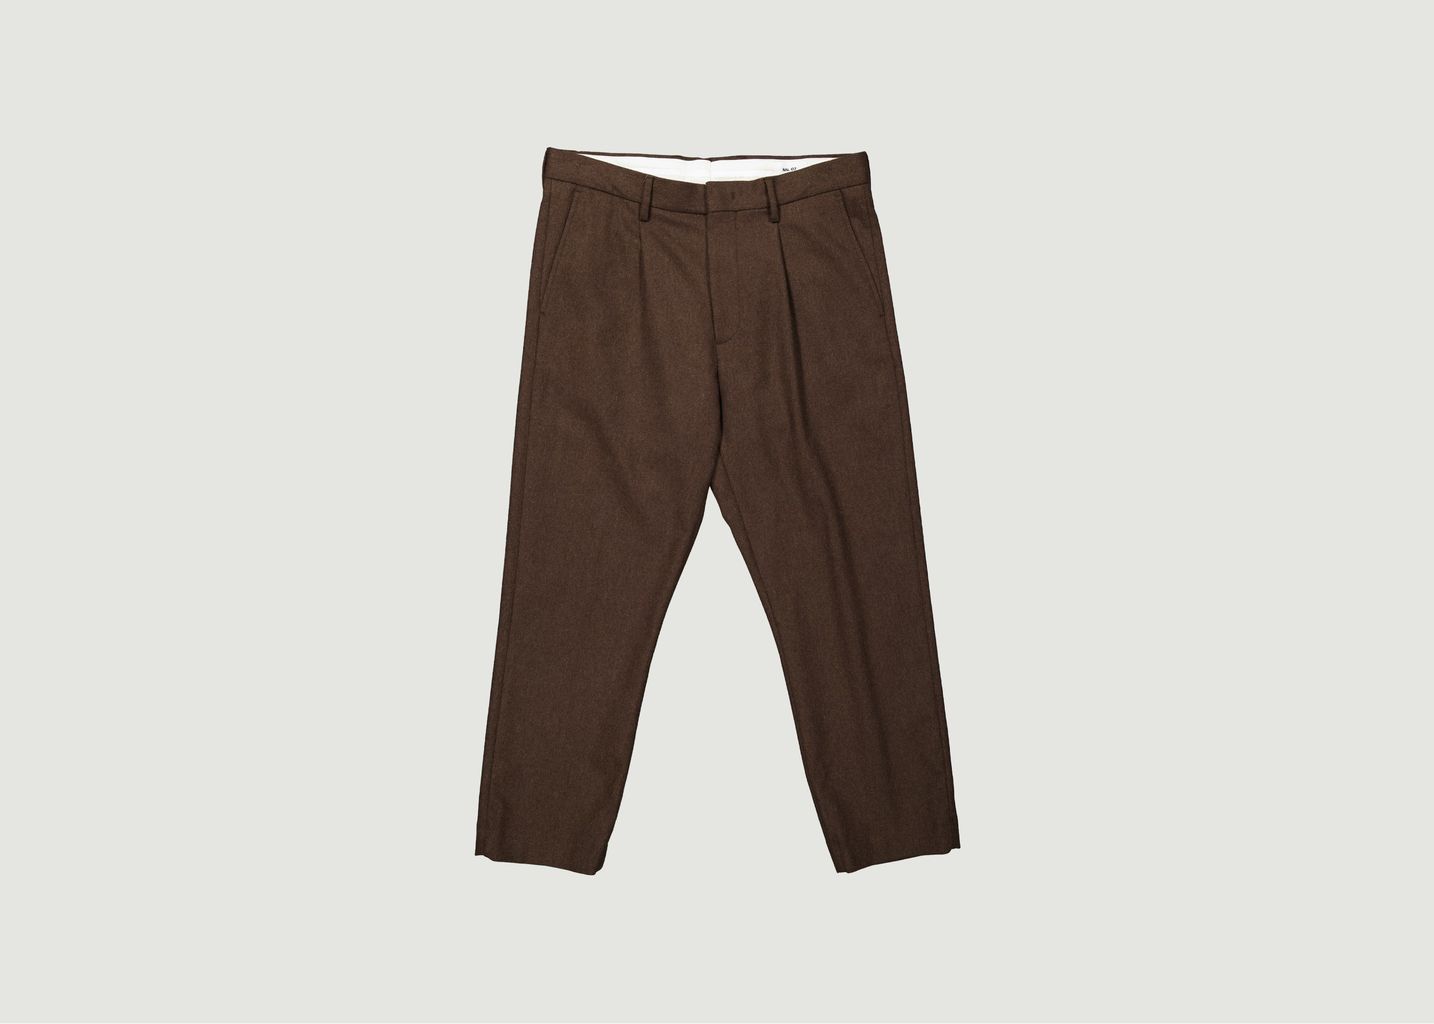 No Nationality 07 Bill 1630 Trousers